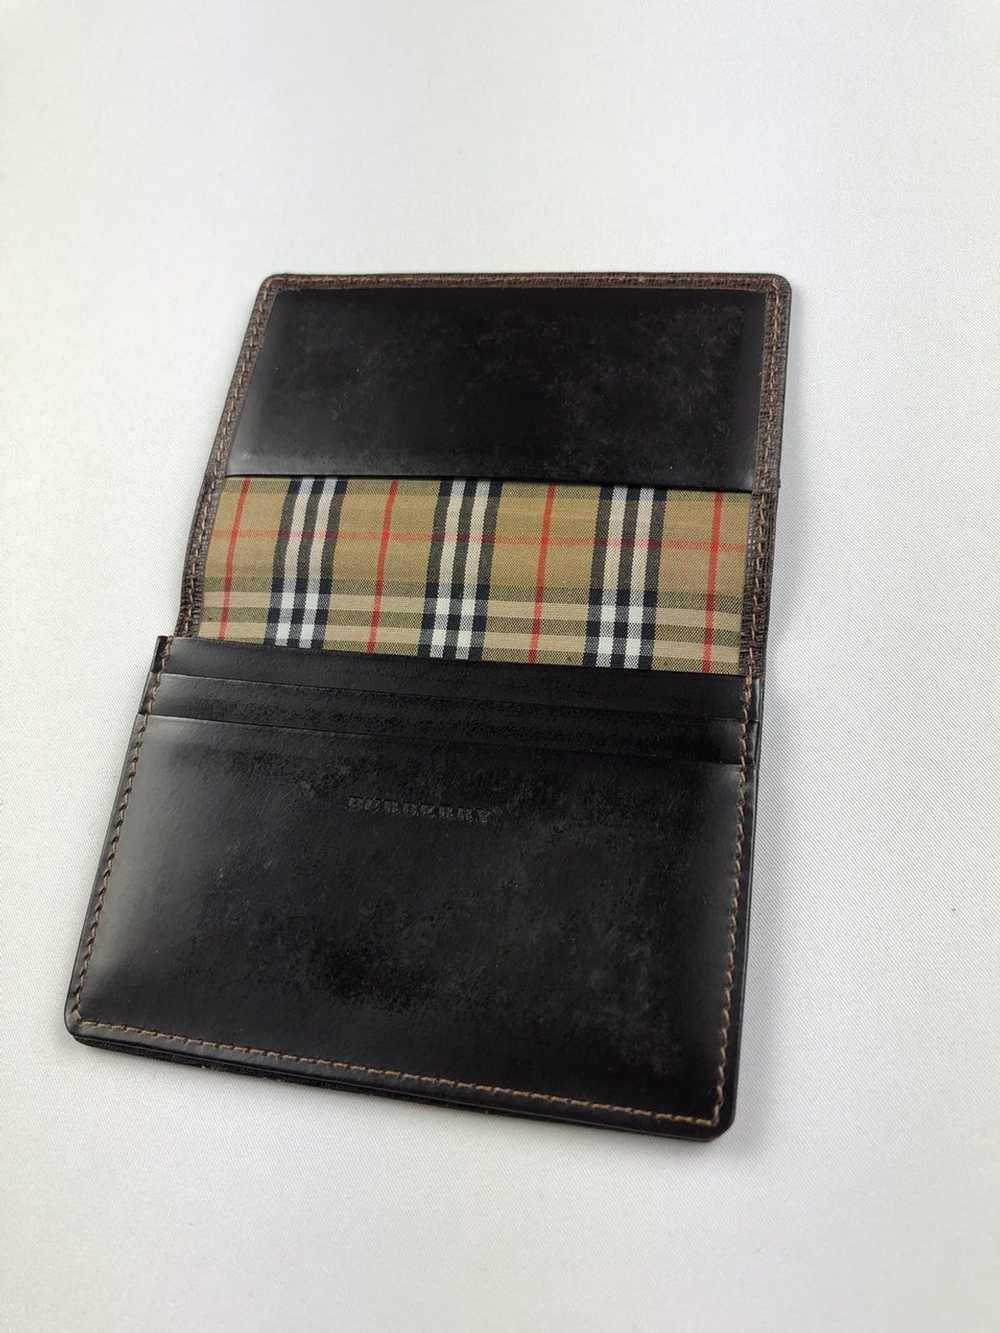 Burberry Burberry brown leather card holder - image 2